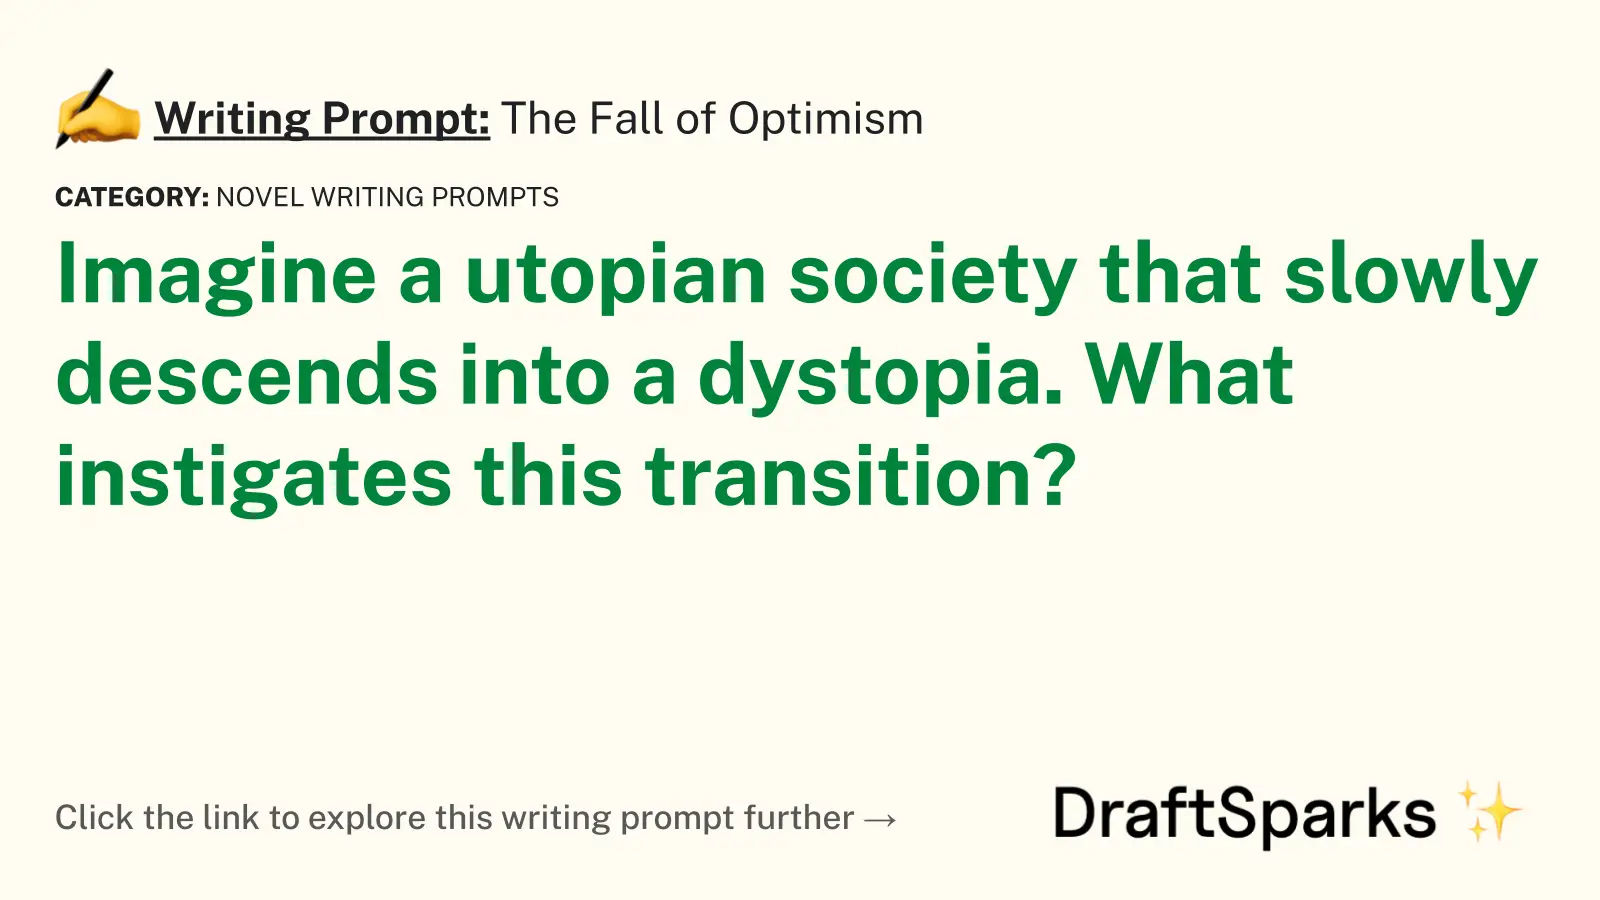 The Fall of Optimism